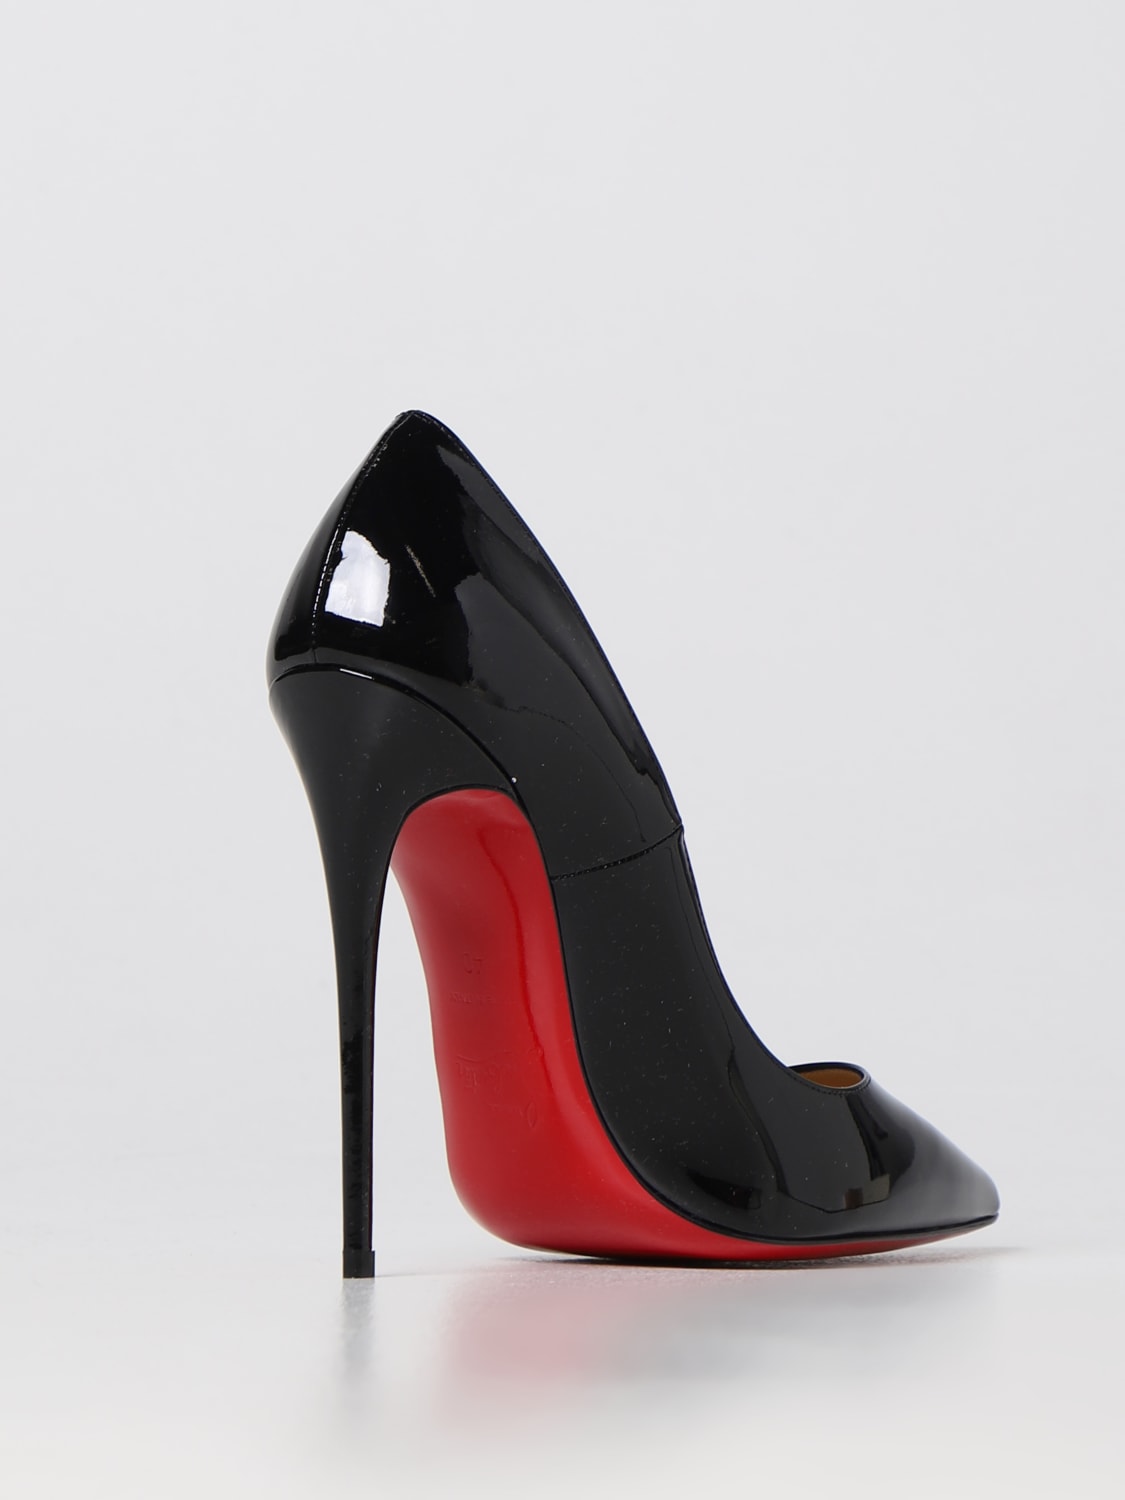 CHRISTIAN LOUBOUTIN: Kate patent - Black | Christian pumps 3130694 online GIGLIO.COM